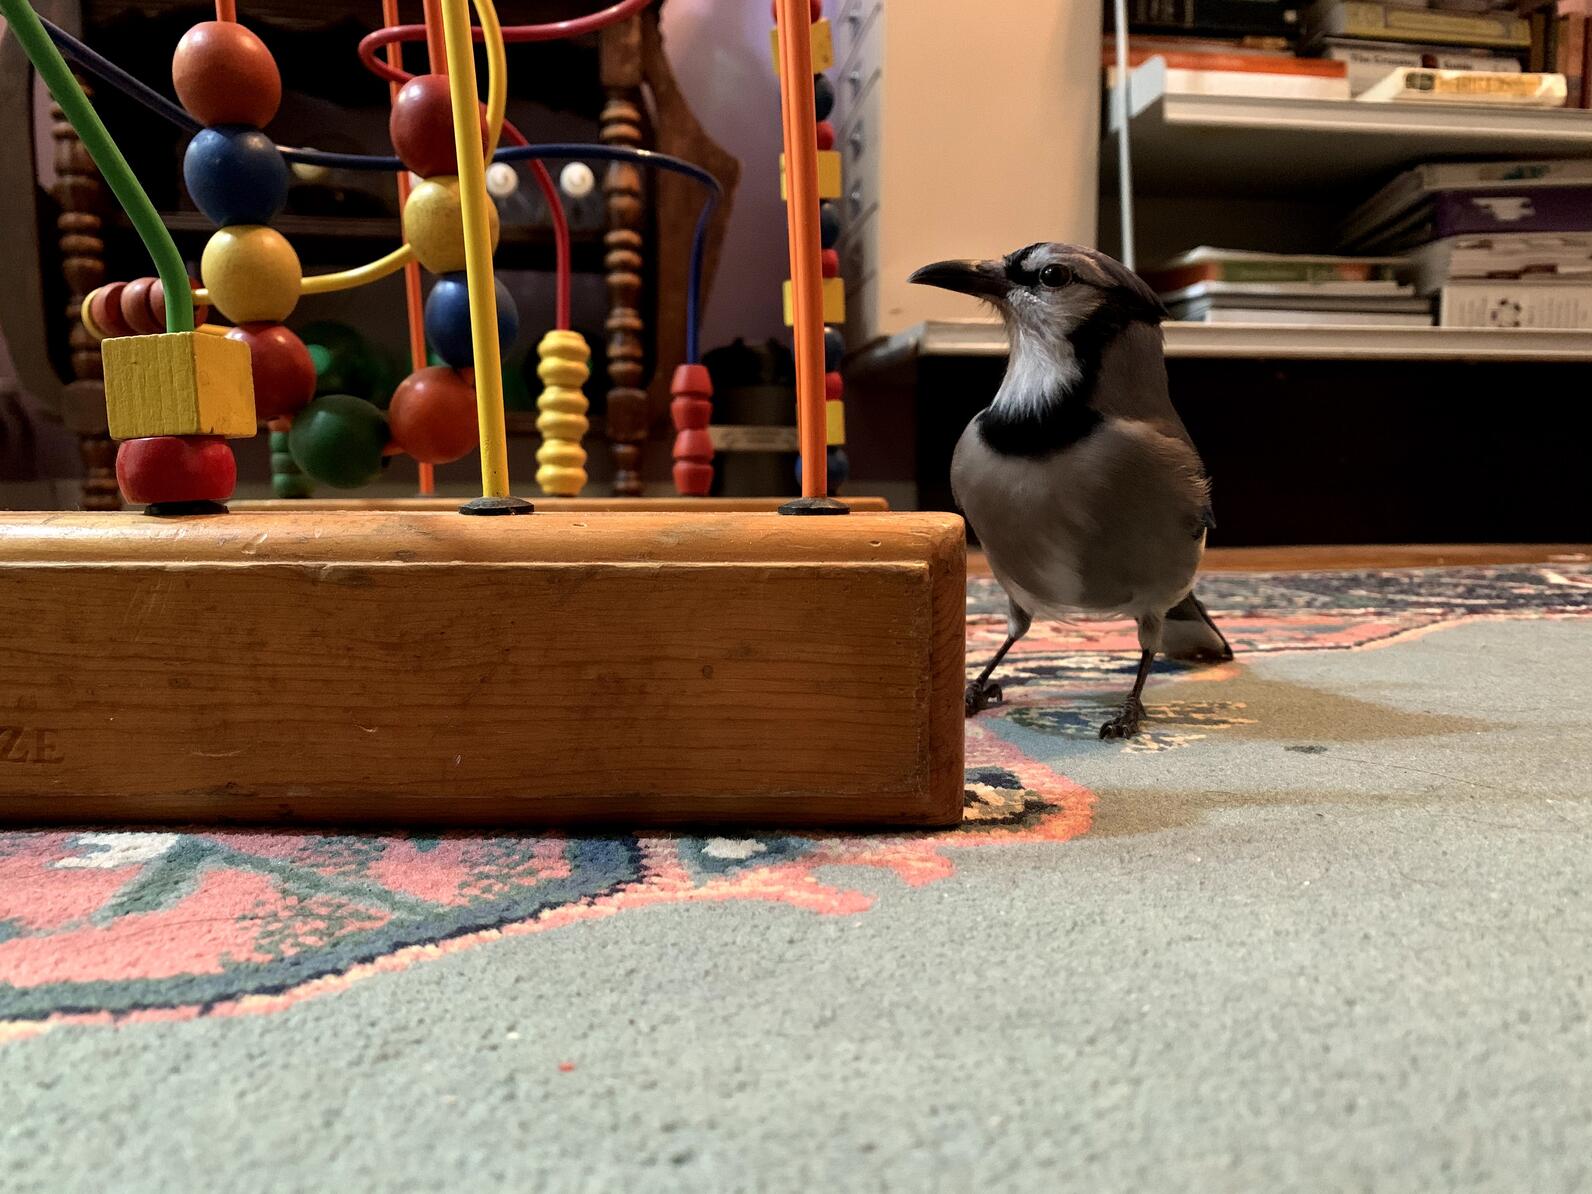 A blue jay is next to a children's toy on a rug